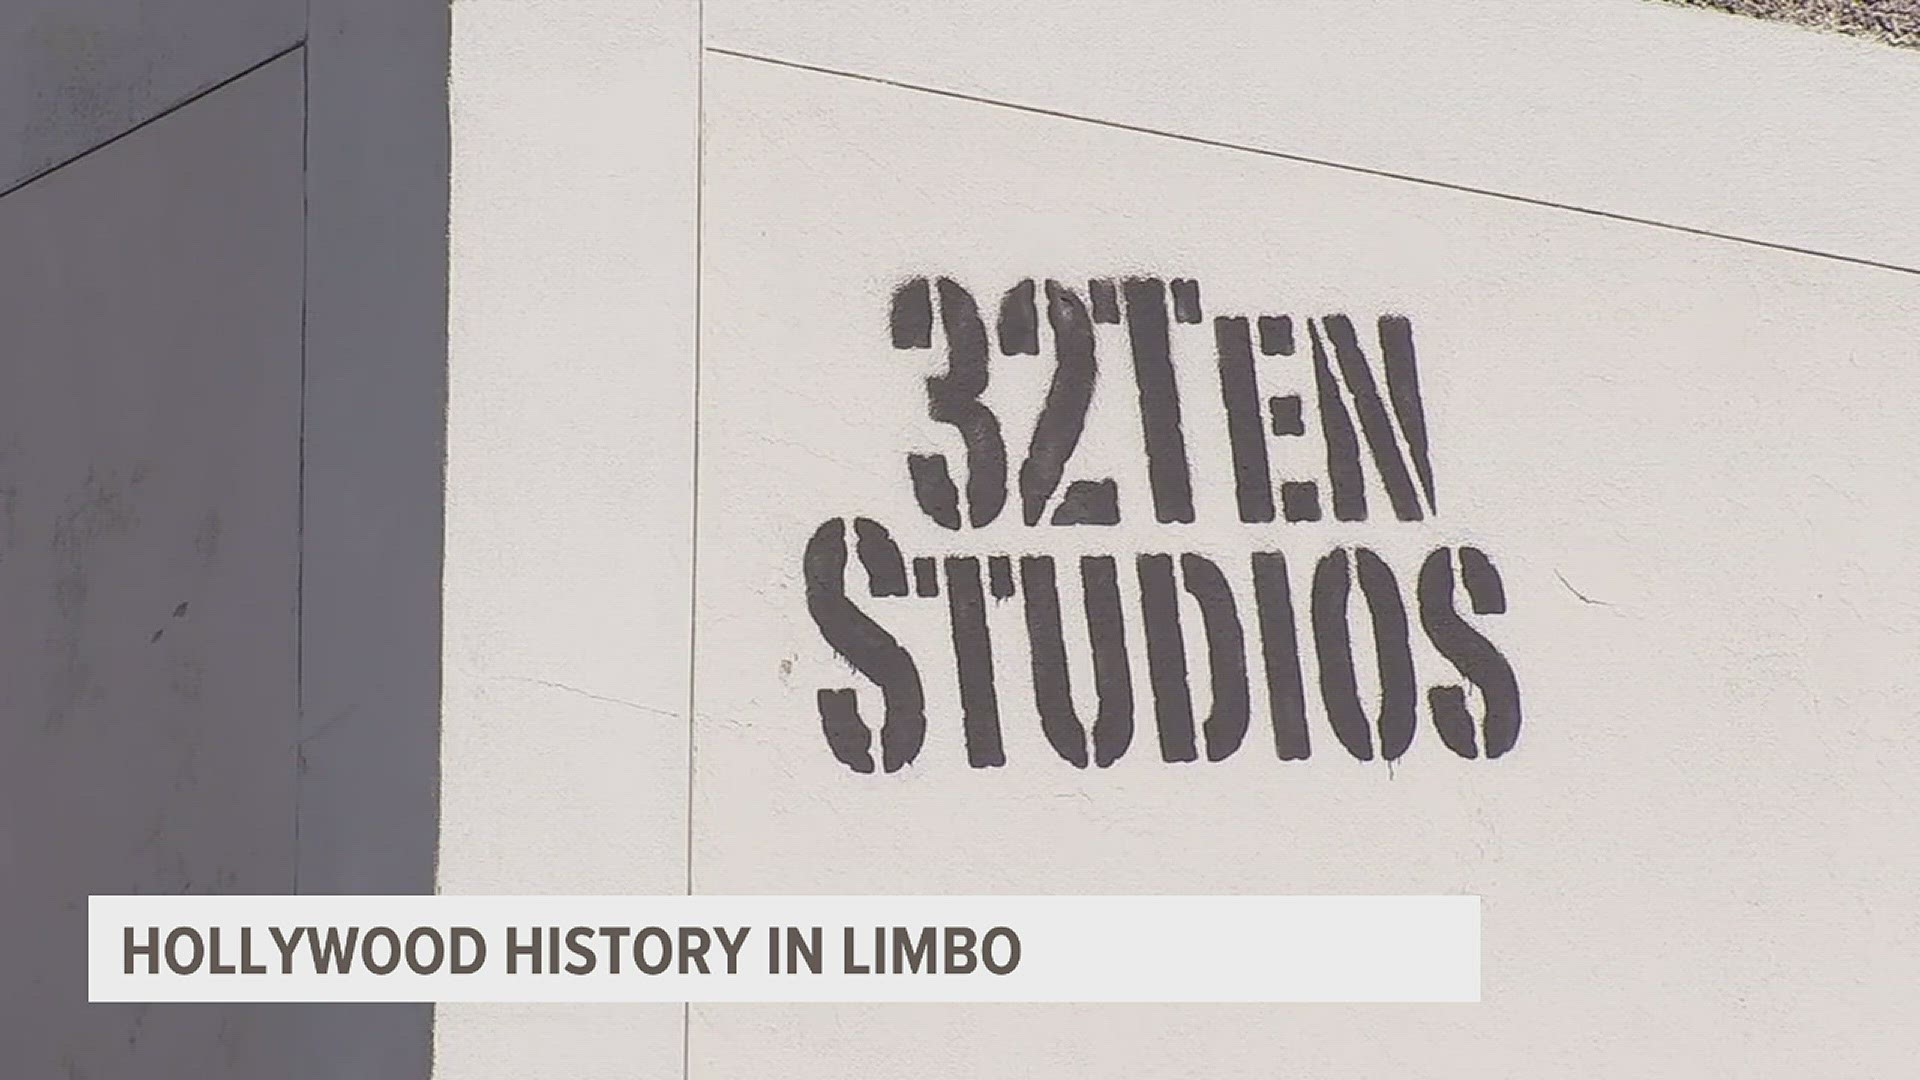 The original soundstage and production site founded by George Lucas is at risk of being demolished.